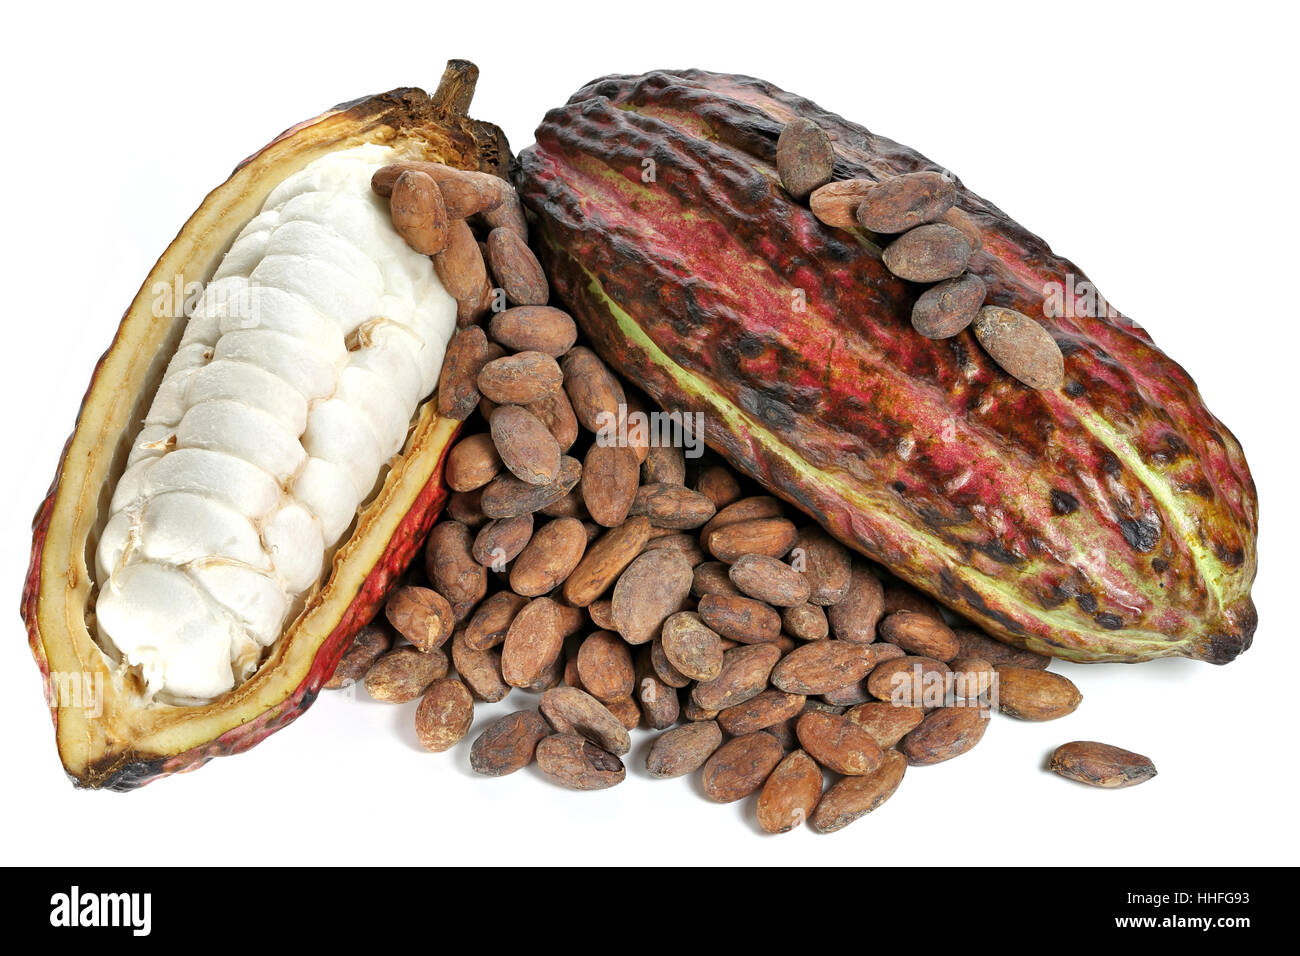 cacao fruits with roasted cacao beans isolated on white background Stock Photo